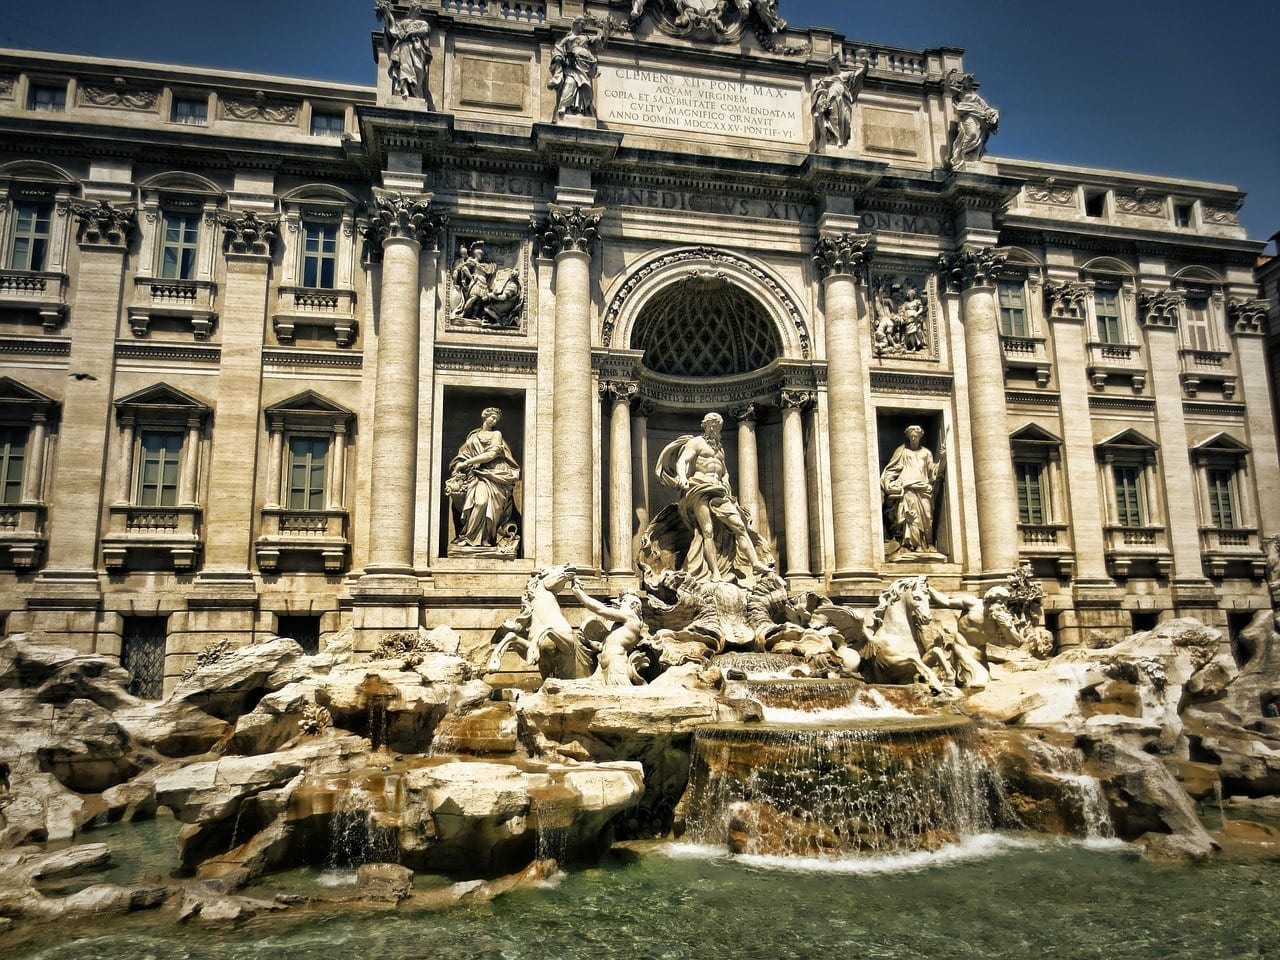 The Trevi Fountain, covered with Baroque era white marble statues and flowing water.